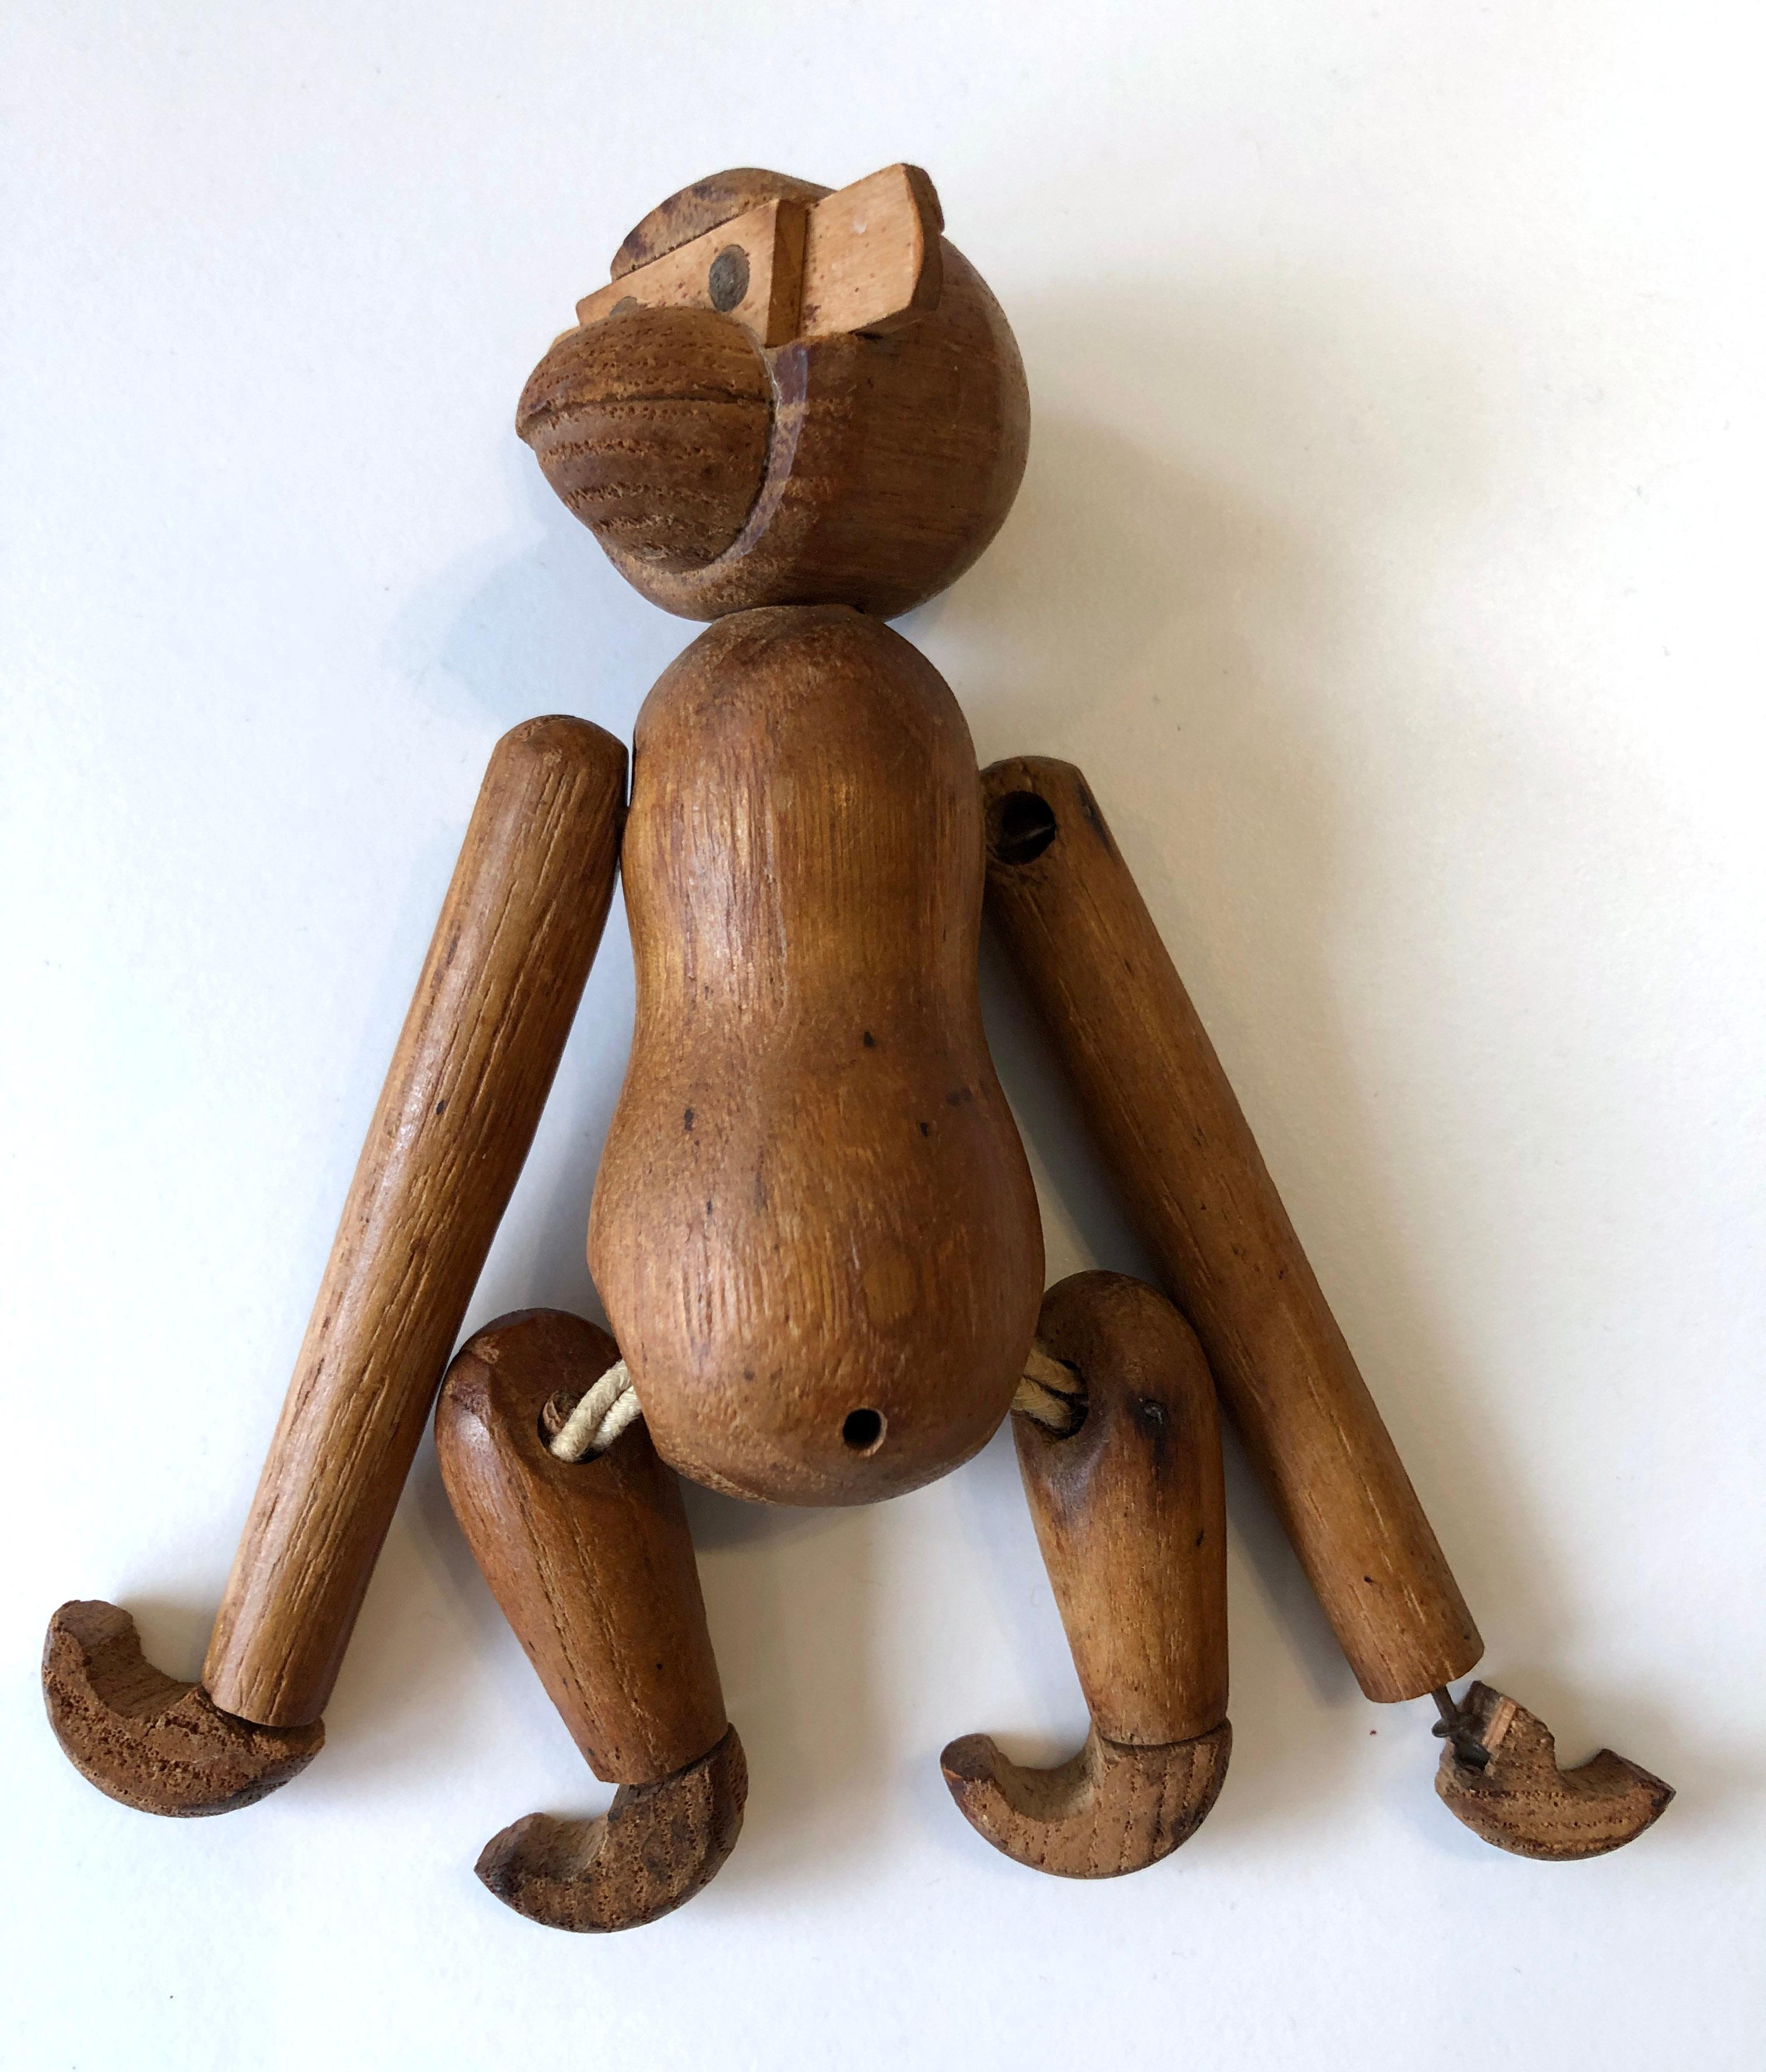 Vintage 1950's small wooden monkey - Kay Bojesen style For Sale 10